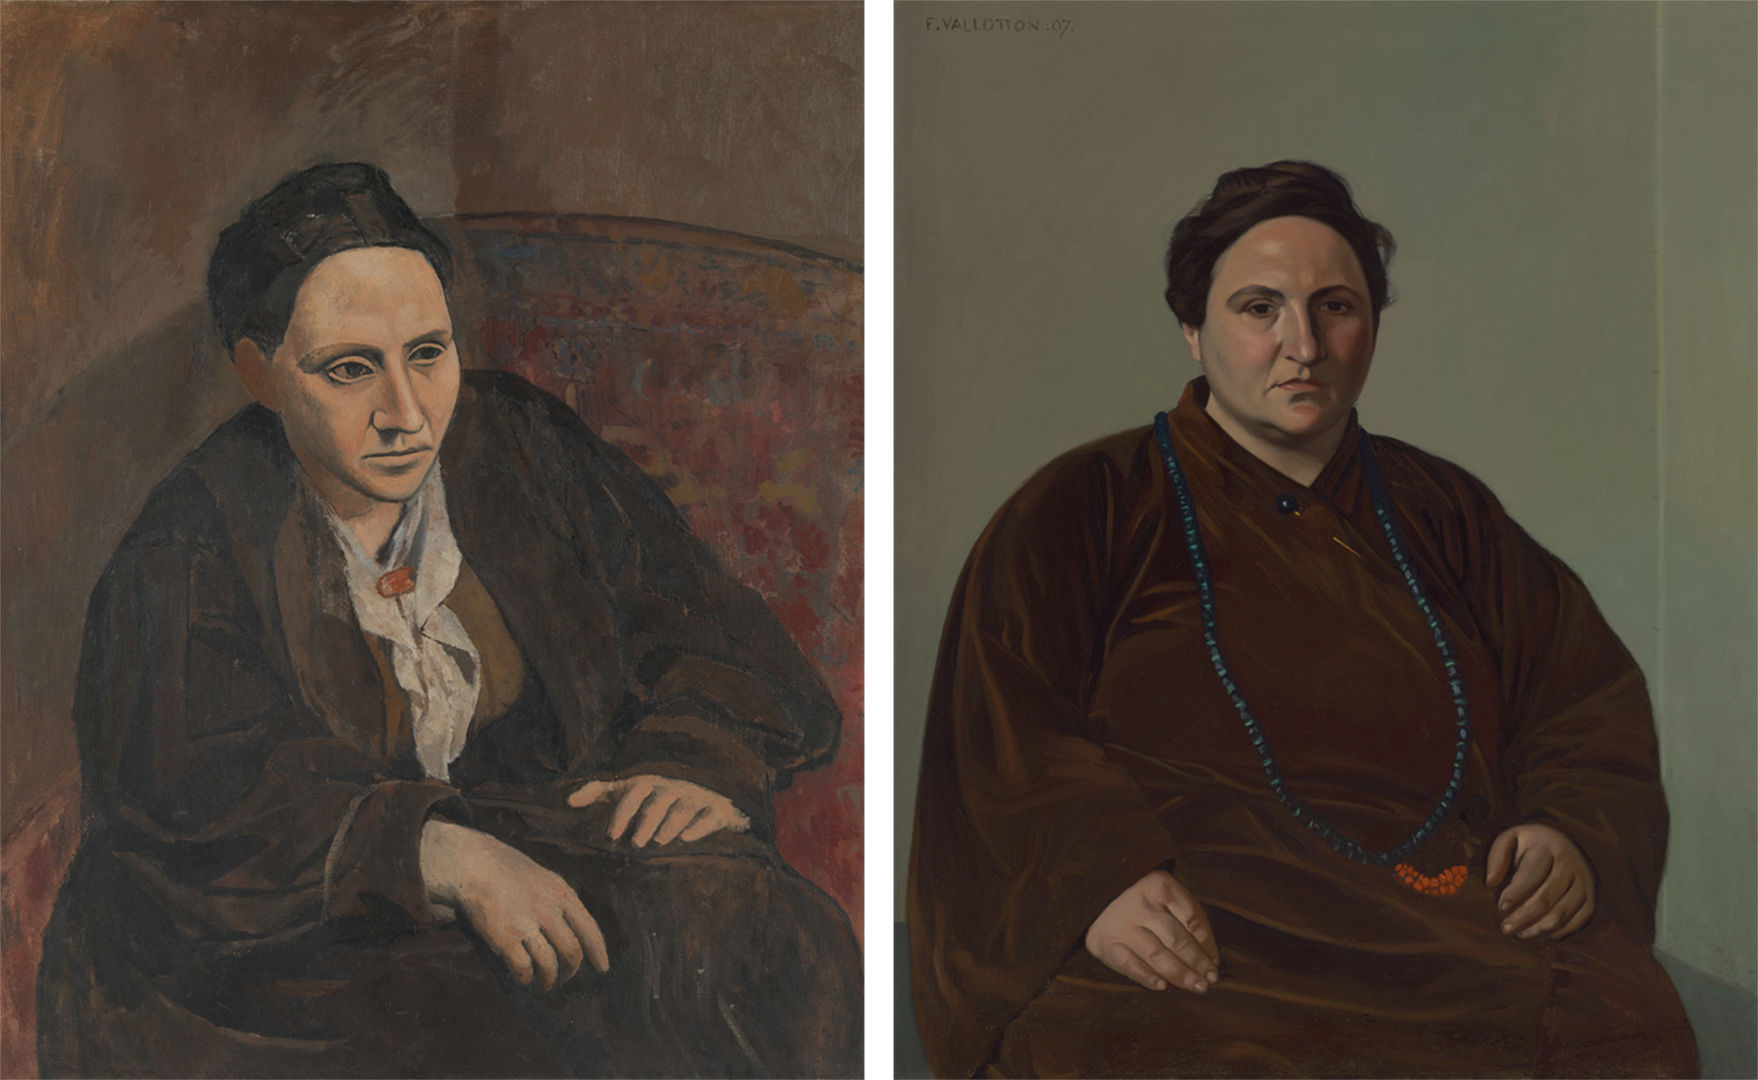 Two portraits of Gertrude Stein: at left, by Pablo Picasso, the poet is leaning forward with her hands on her knees, with bright lighting and powerful brushwork. At right, by Felix Vallotton, a more realistic depiction of the poet with her hands on her lap